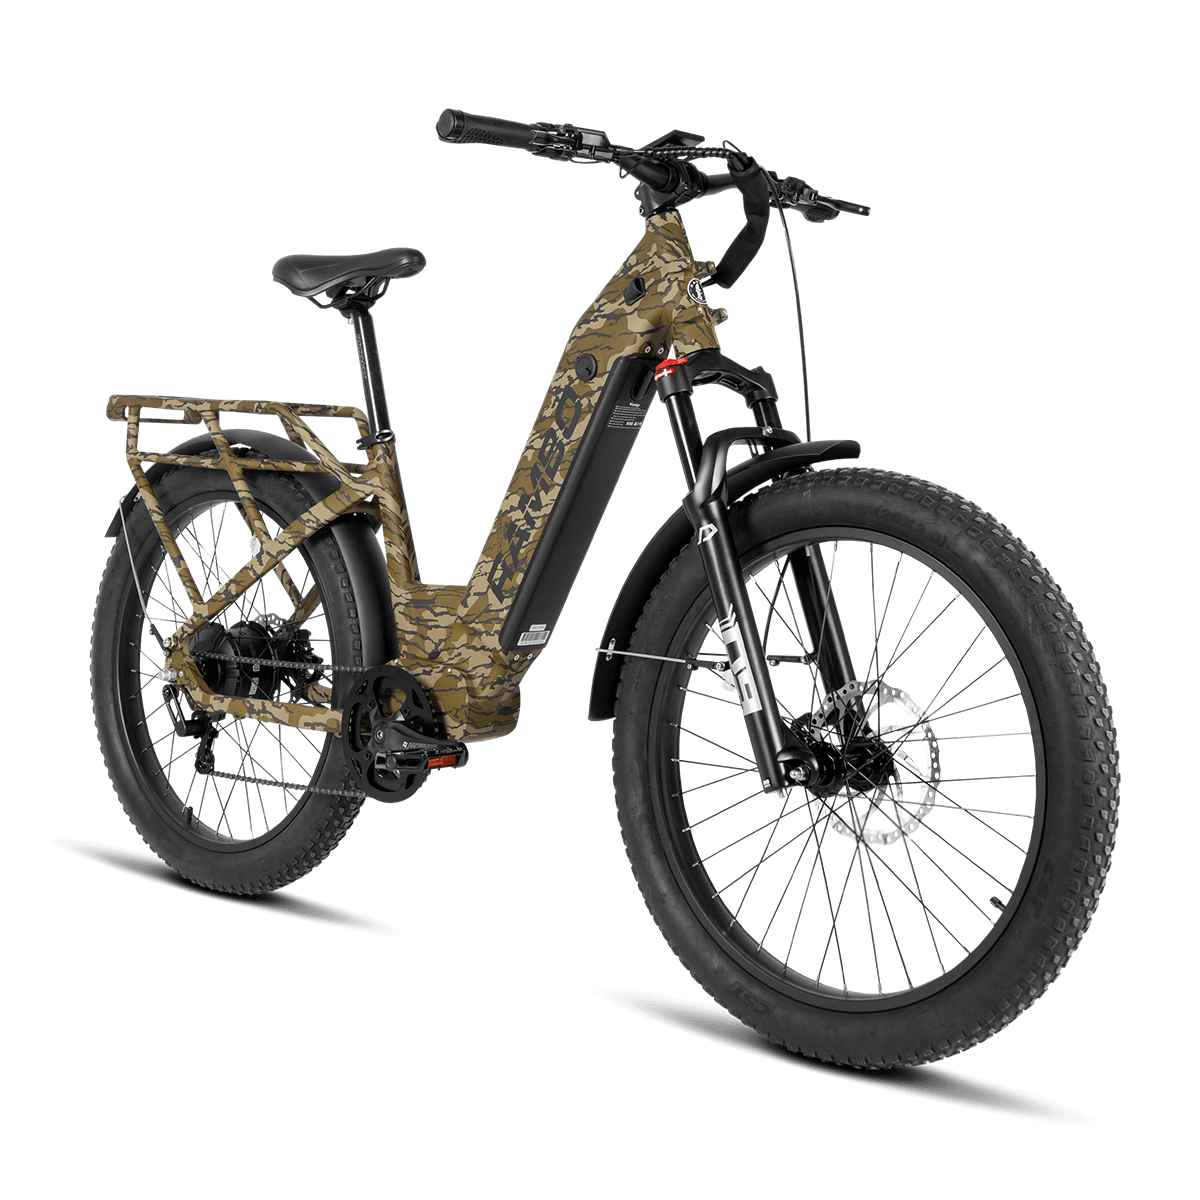 Front view picture of the Nomad 2.0 750W Mossy Oak Bottomland Camo